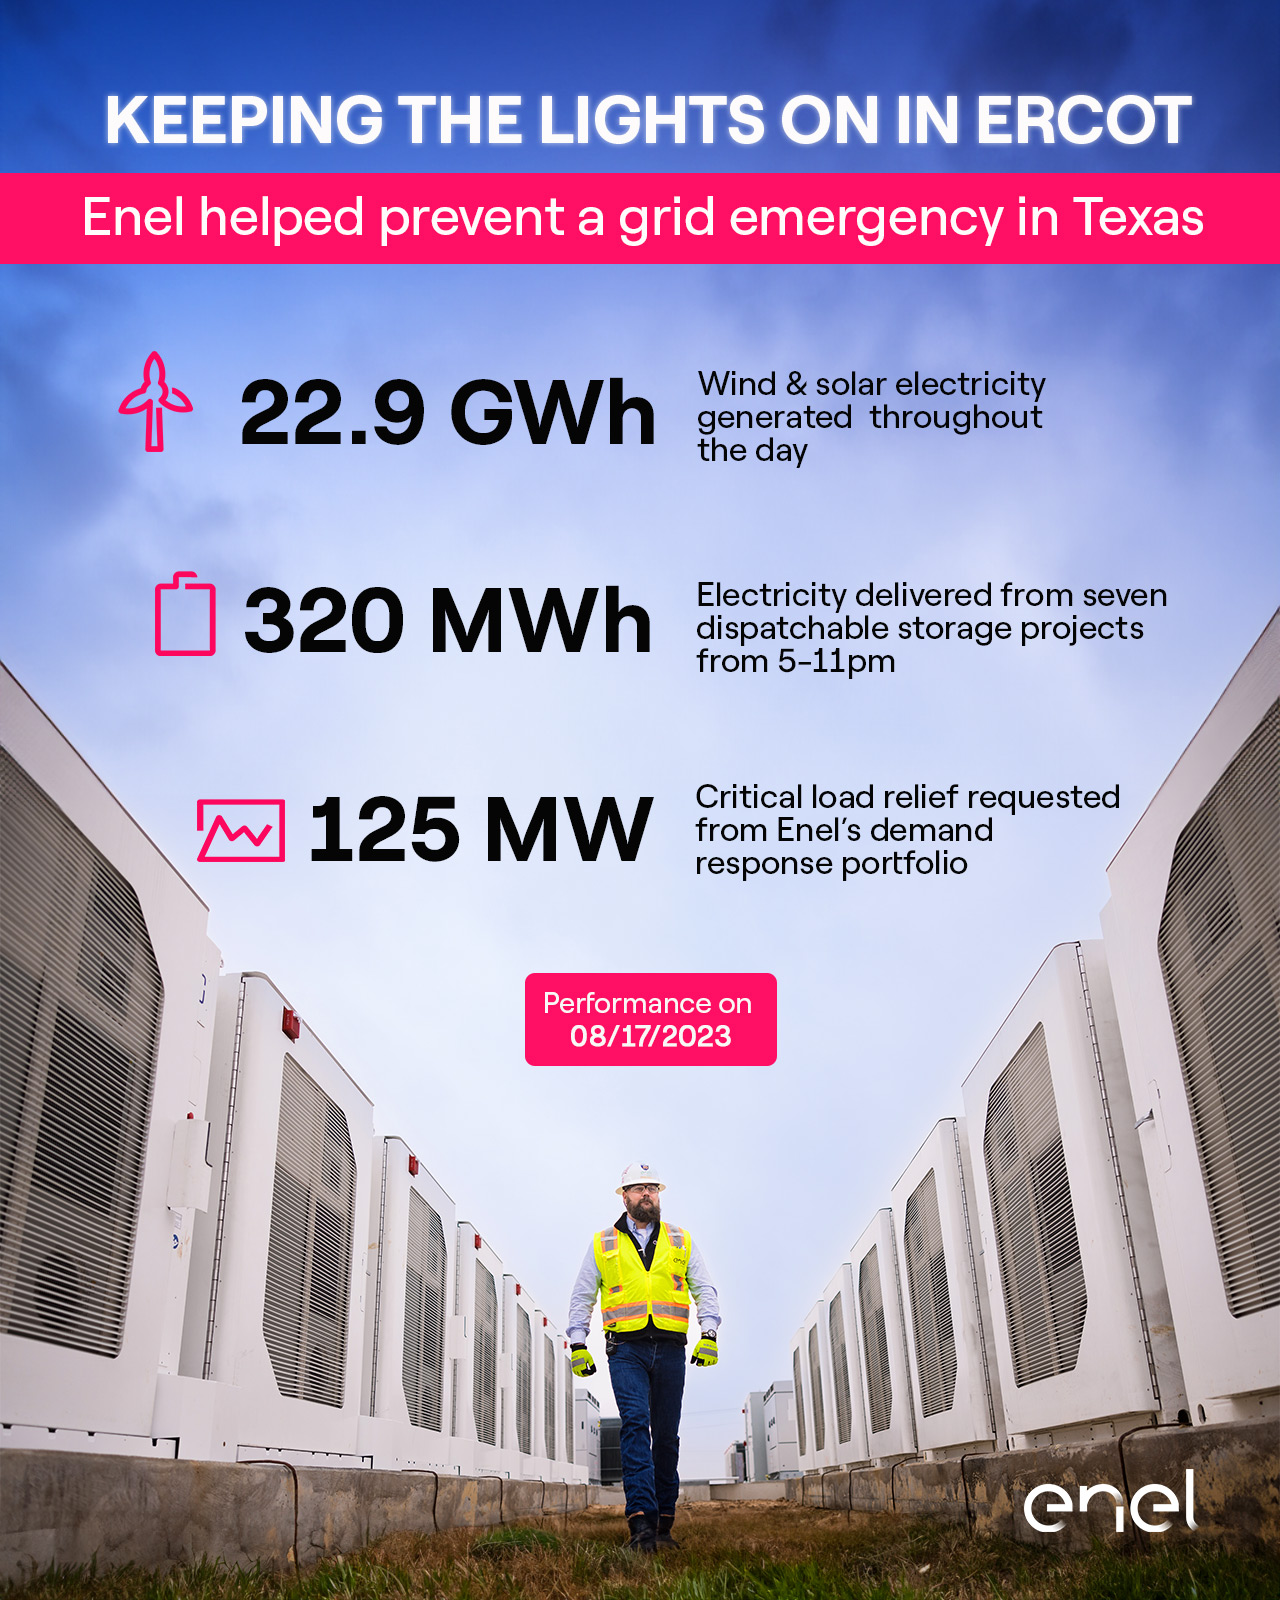 Poster stats on how Enel helped prevent a Texas power grid emergency